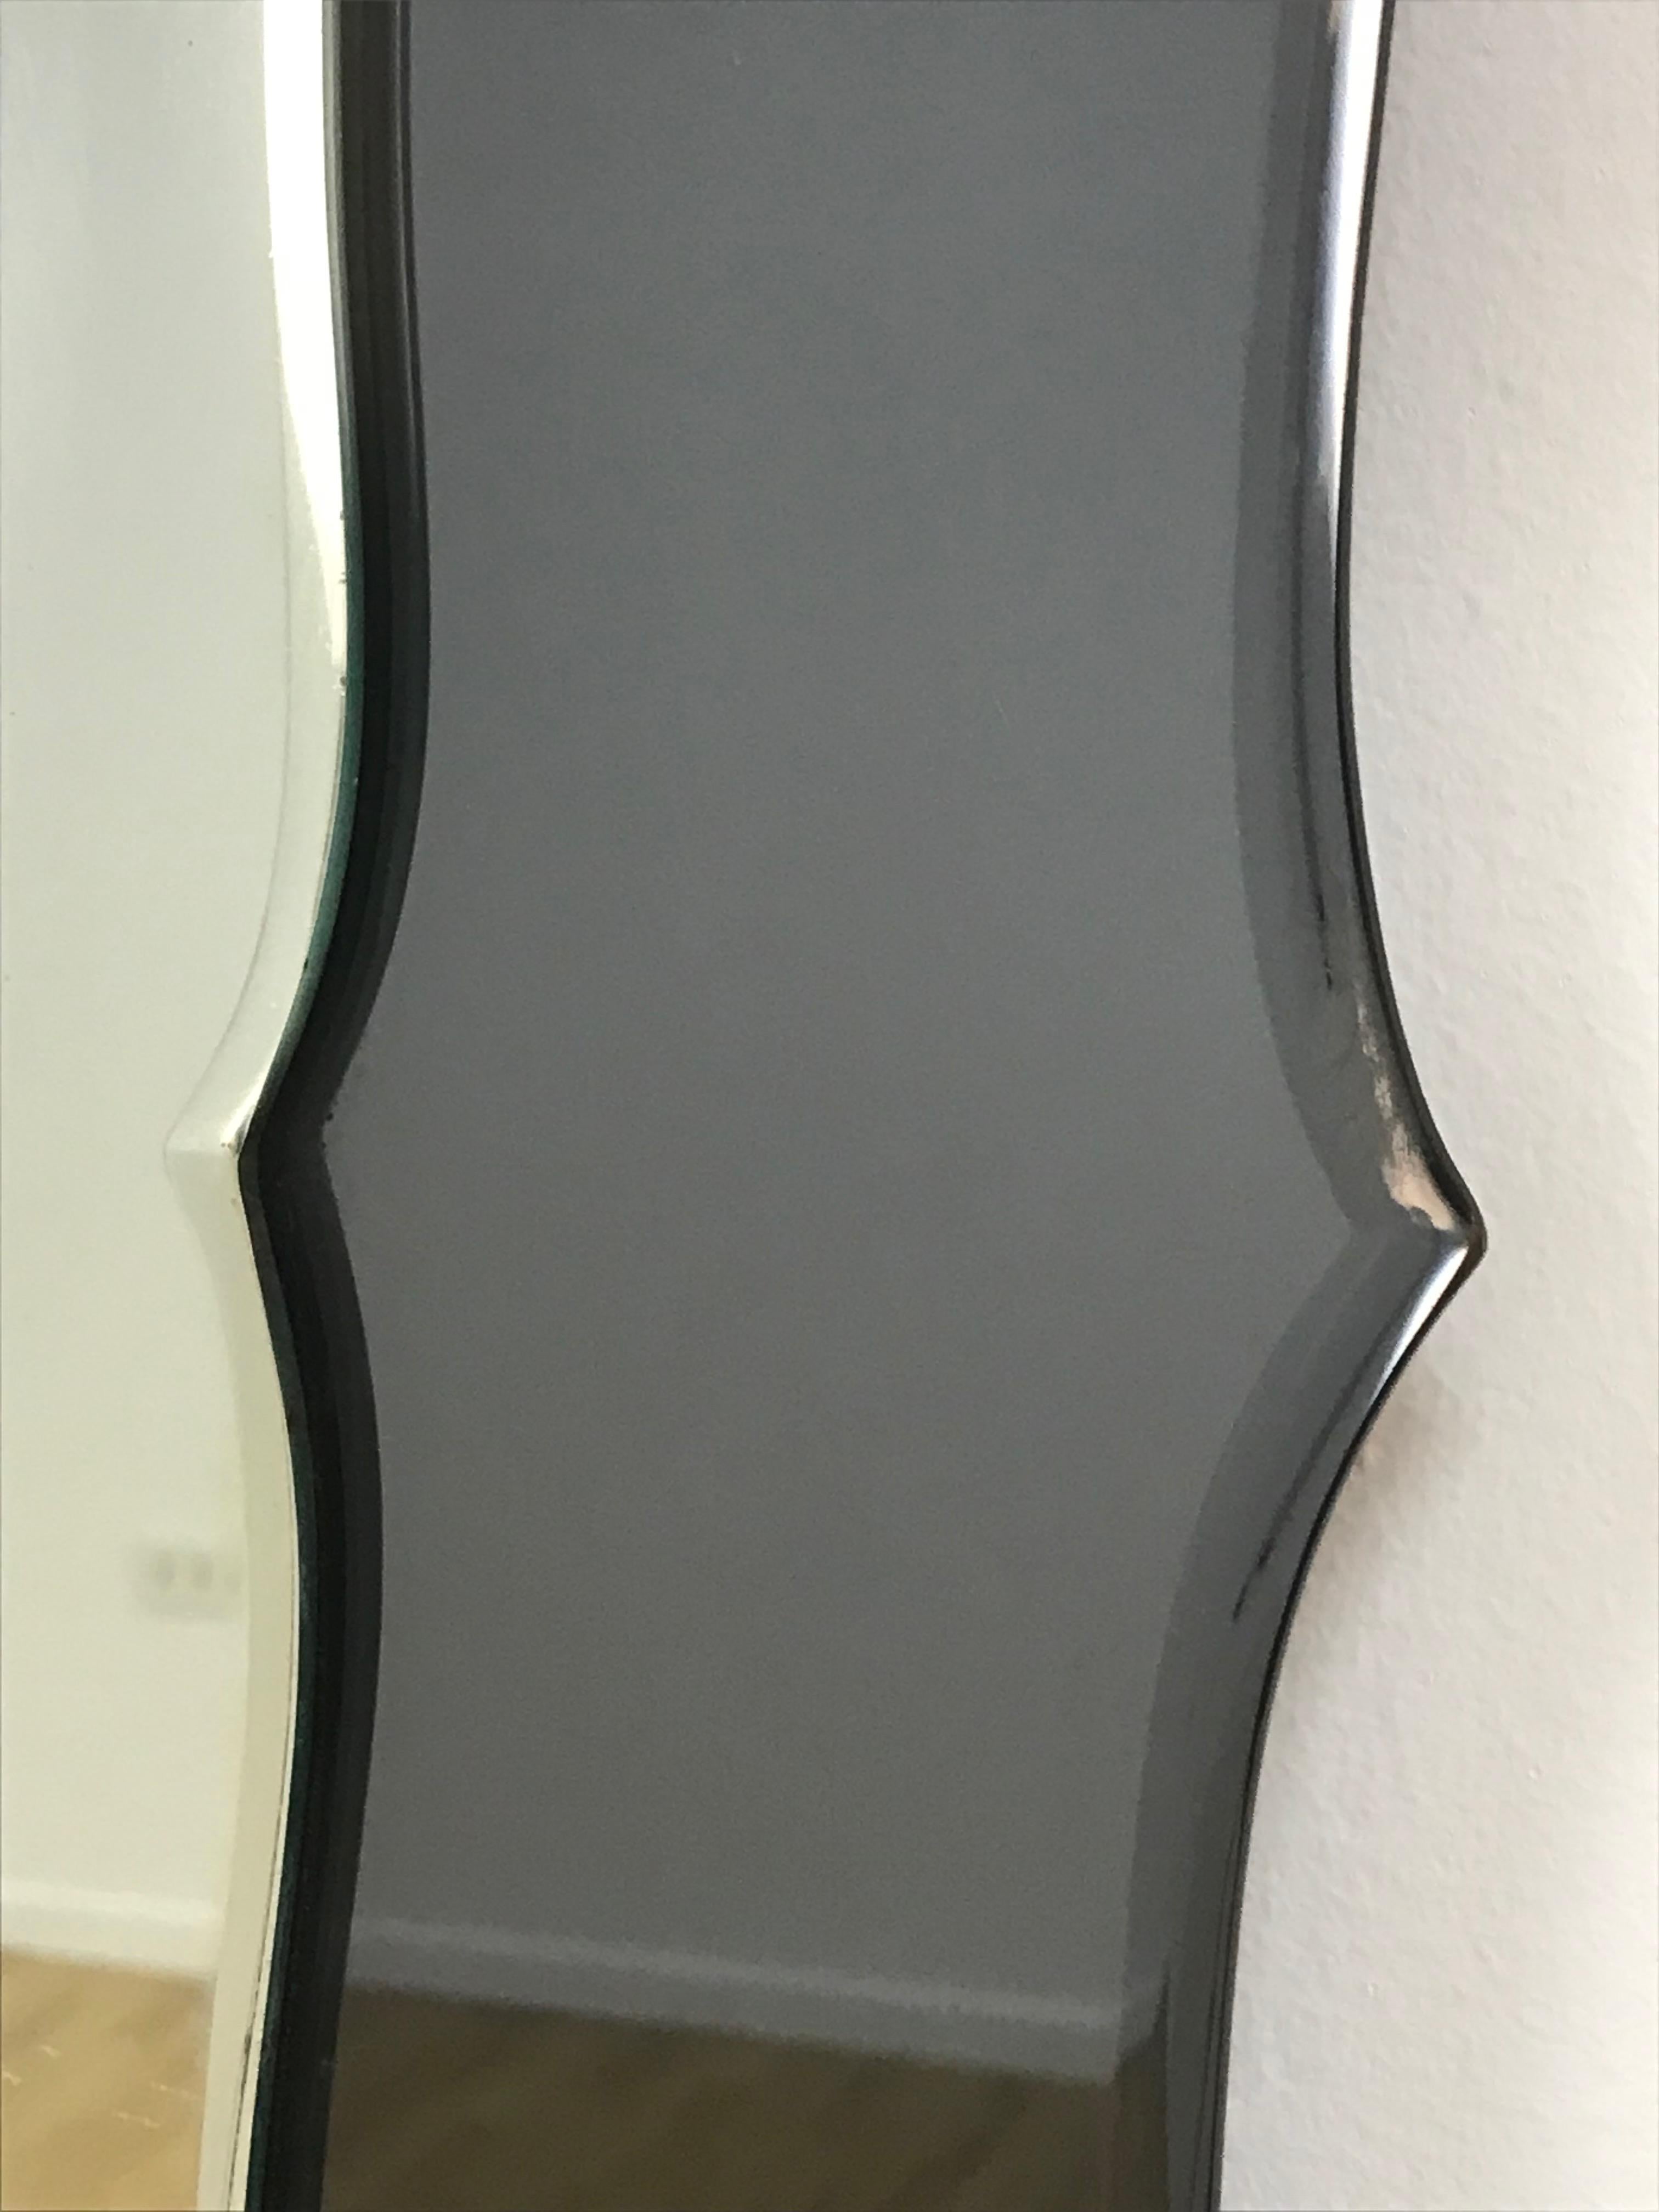 Midcentury Double-Layered Italian Wall Mirror in the style of Fontana Arte 1950s For Sale 5